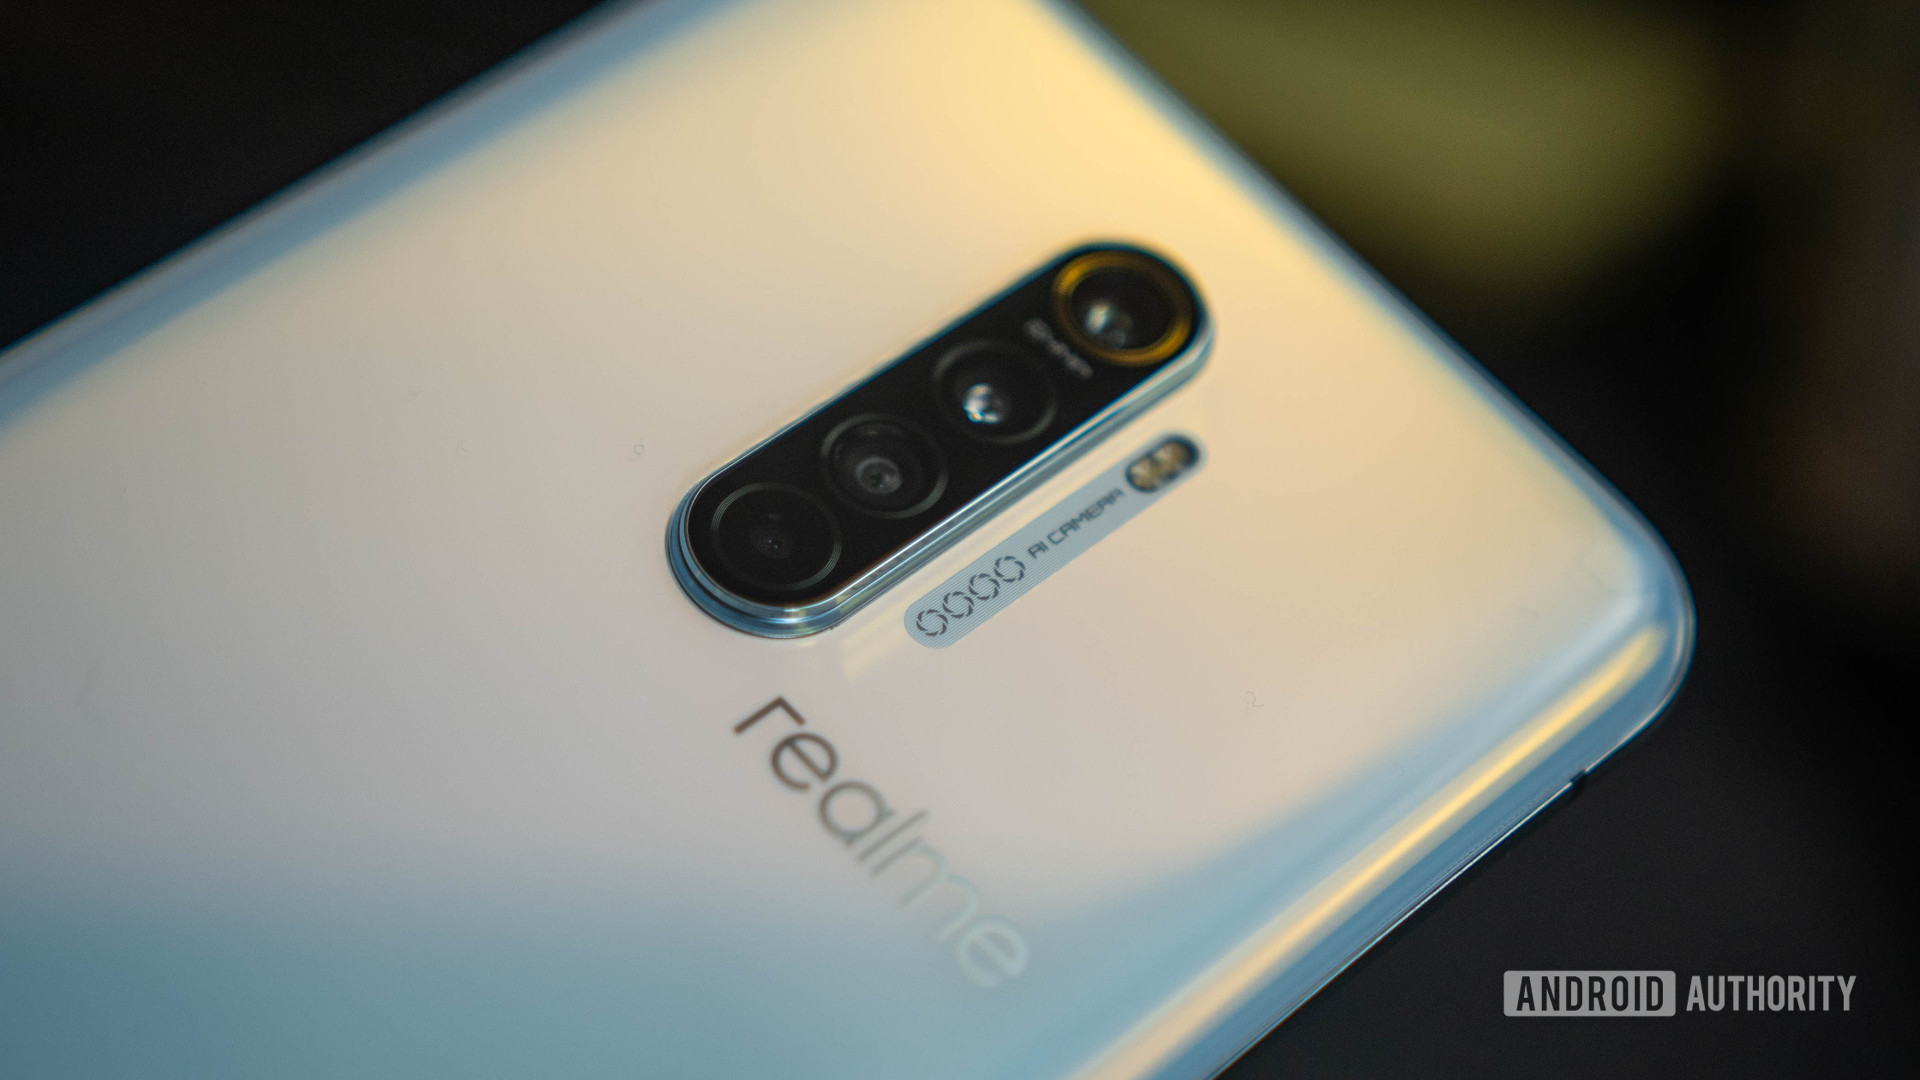 Realme X2 Pro review: The best value smartphone around?